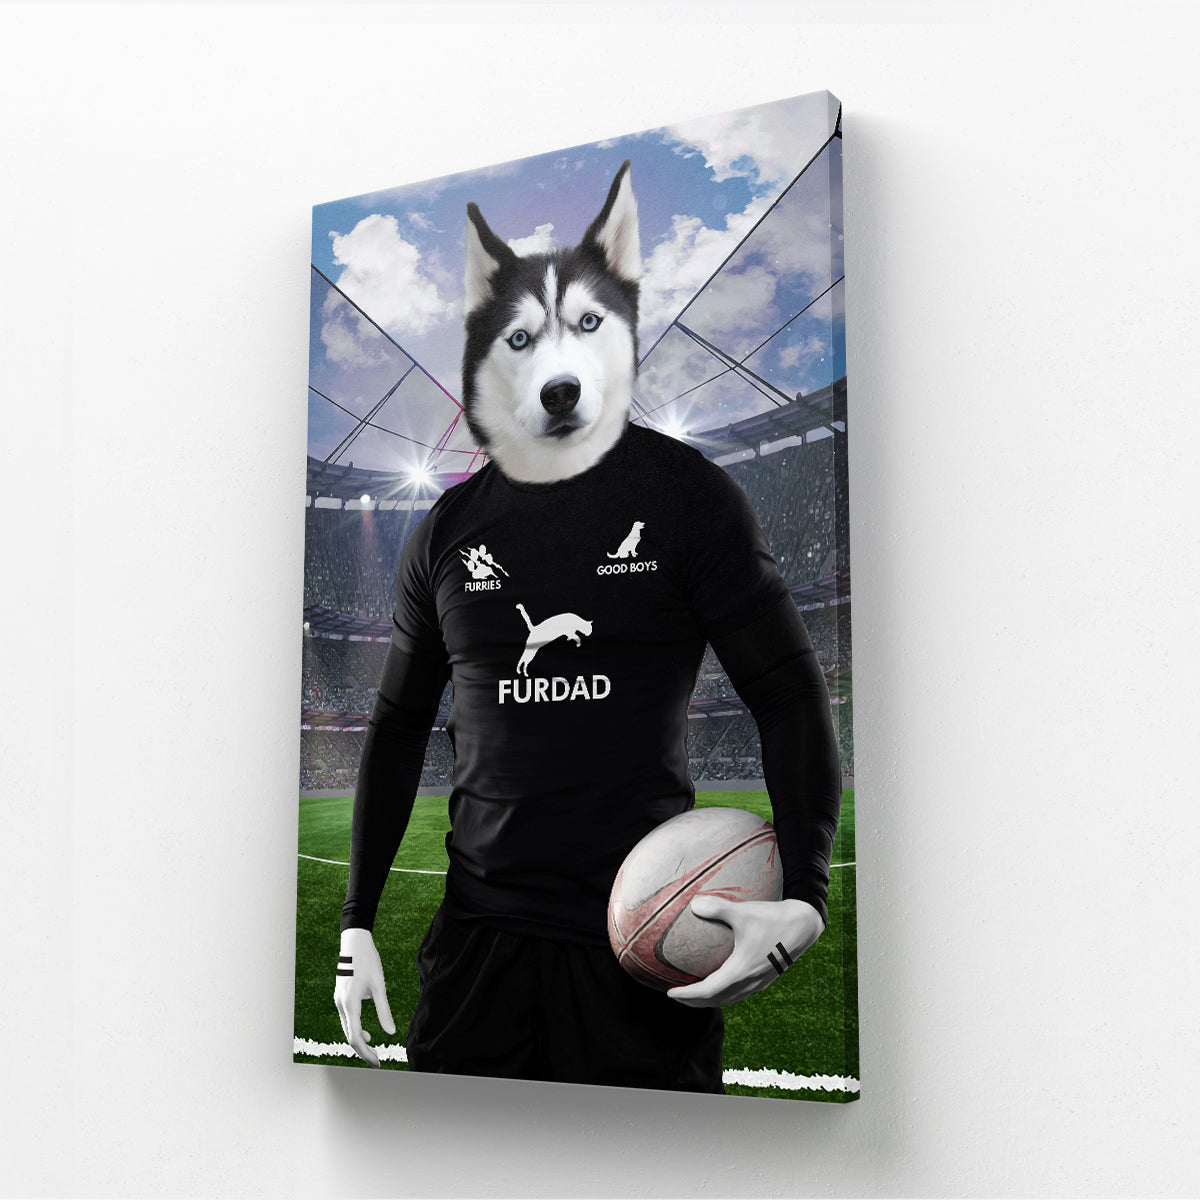 New Zealand Rugby Team: Paw & Glory, pawandglory, custom pet painting, dog canvas art, paintings of pets from photos, custom dog painting, pet portraits, funny dog paintings, small dog portrait